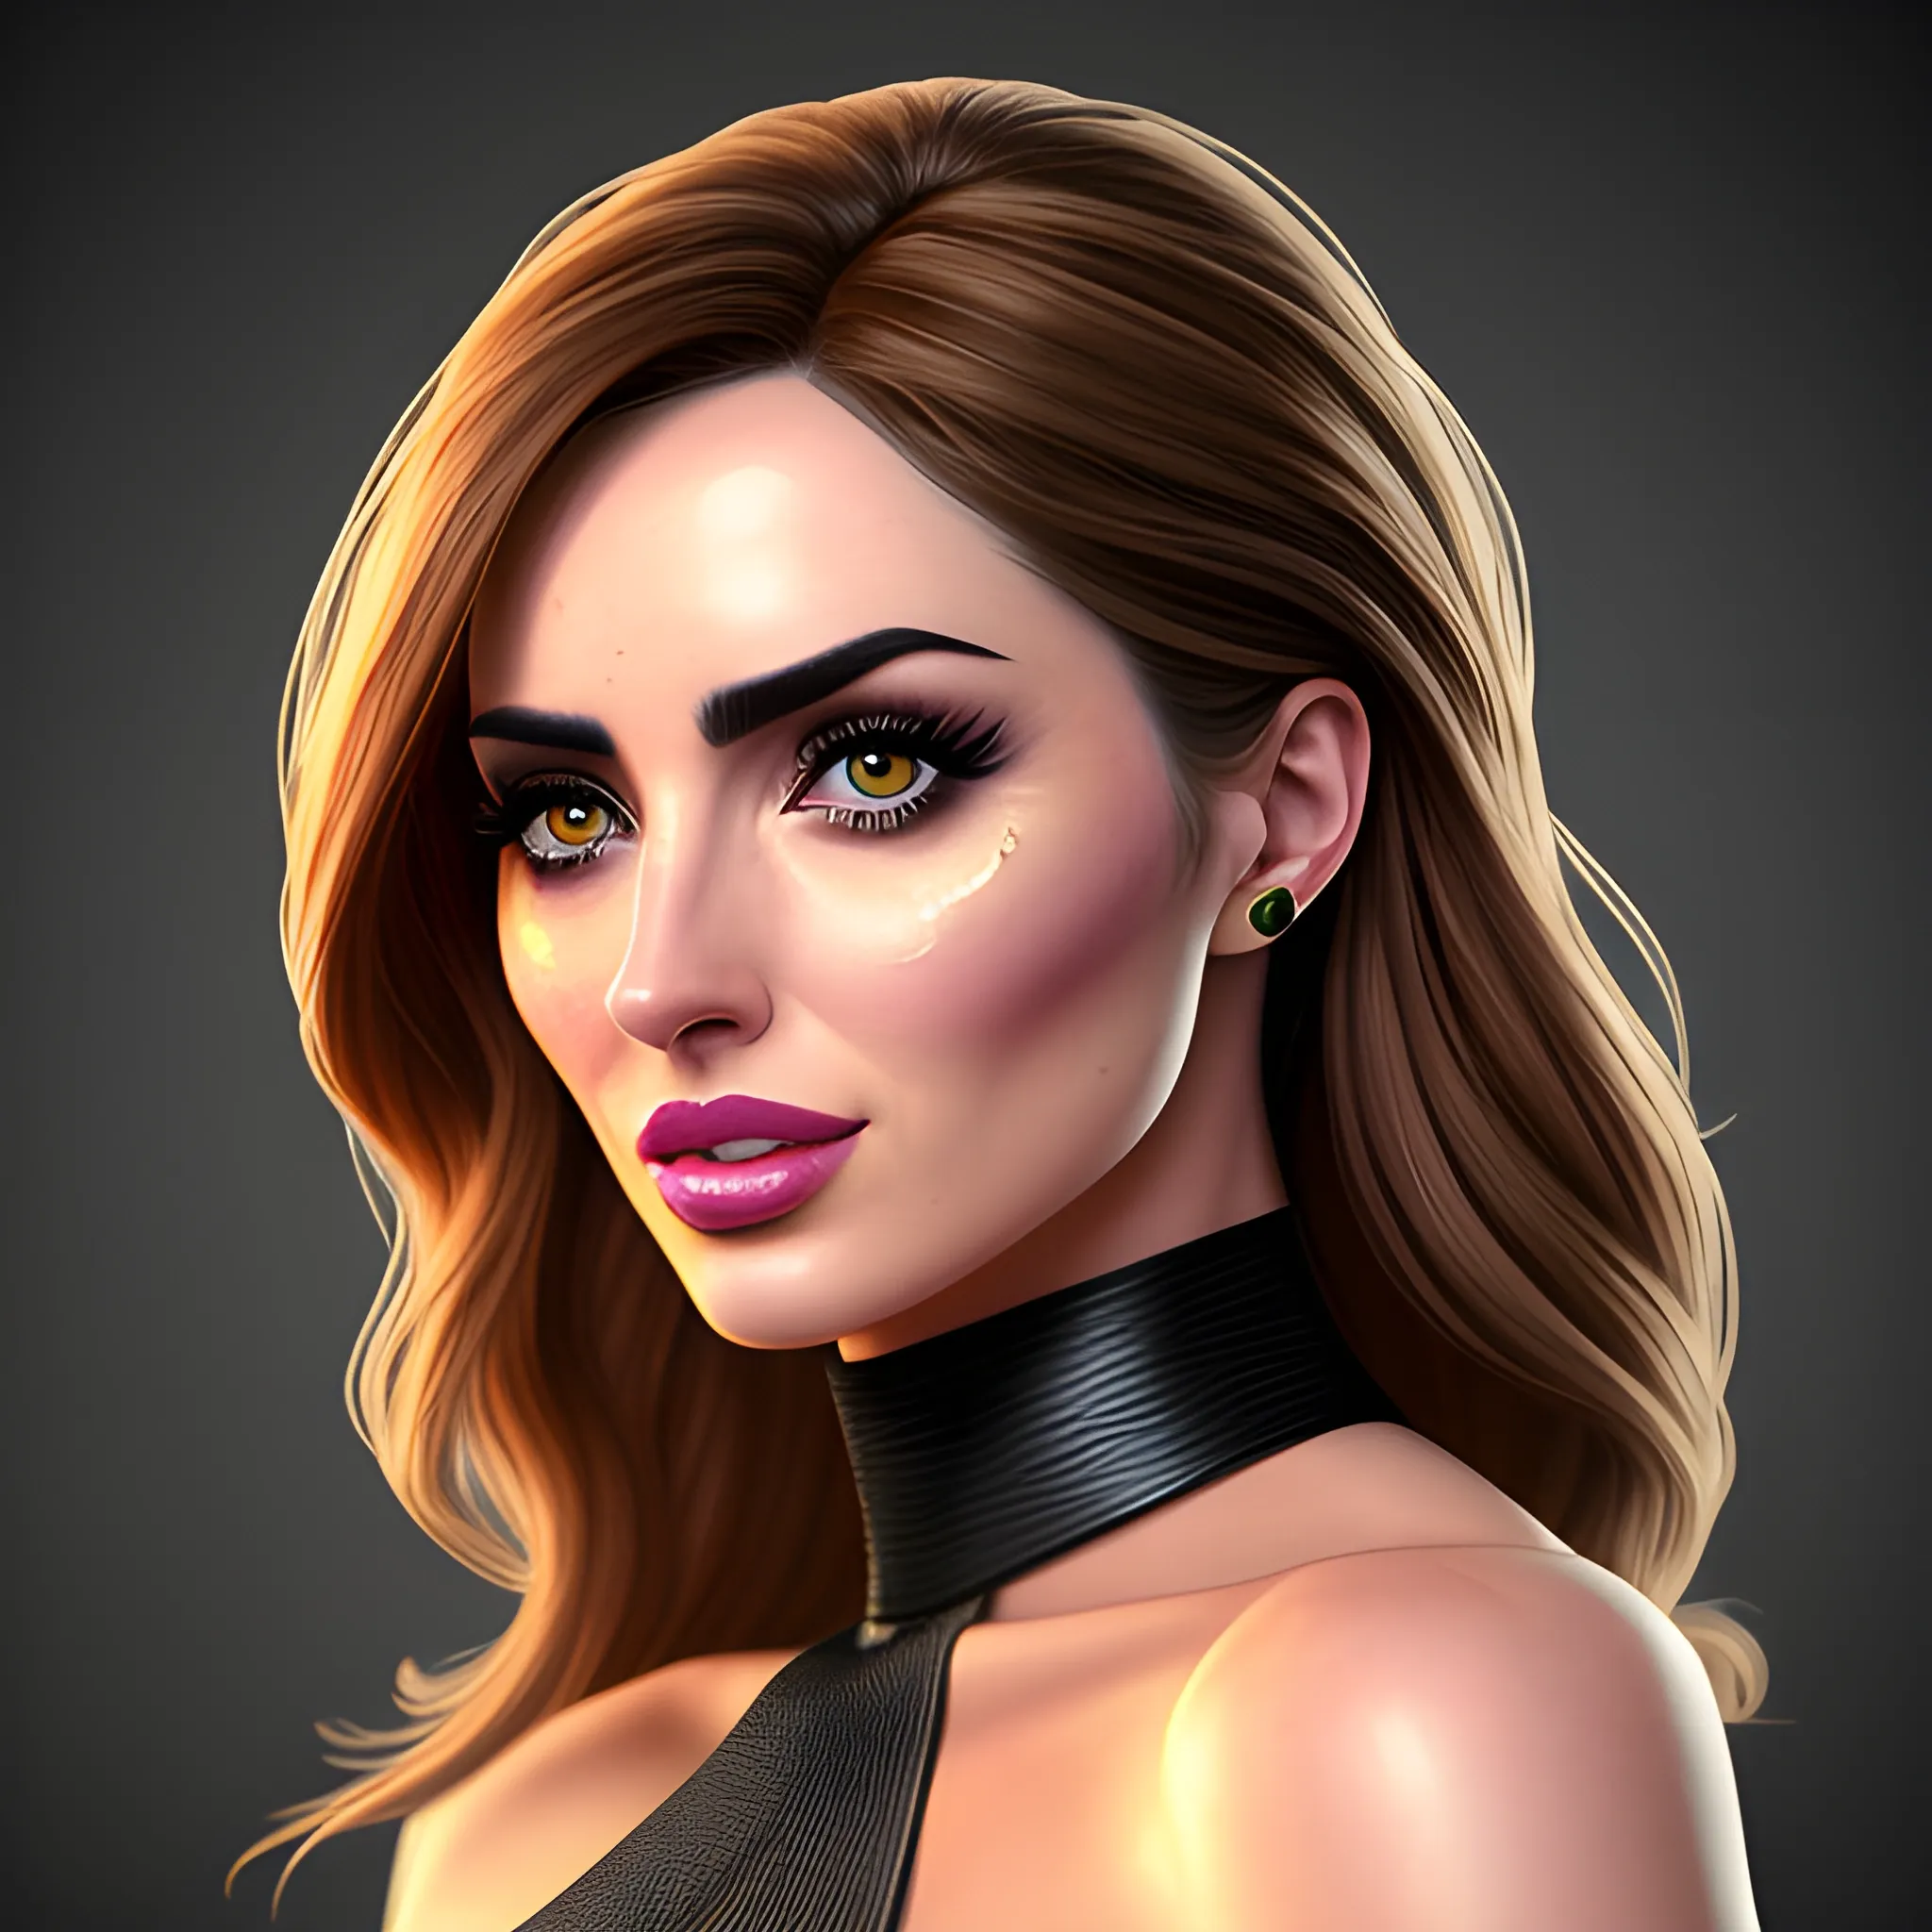 Generate a hyper-realistic 4K illustration of super girl, incorporating the highly expressive face of Ana de armas. Use high-quality references of Ana de Armas for facial expression and Ana de Armas for costume and pose. Ensure capturing Ana de Armas' unique essence in portraying Ana de Armas, paying attention to details such as eyes, nose, and mouth. Apply realistic textures for skin and costume, and add shadows and highlights to achieve a hyper-realistic effect. Finally, present the illustration in a 4K format, emphasizing the unique fusion between Ana de Armas and Suér girl
